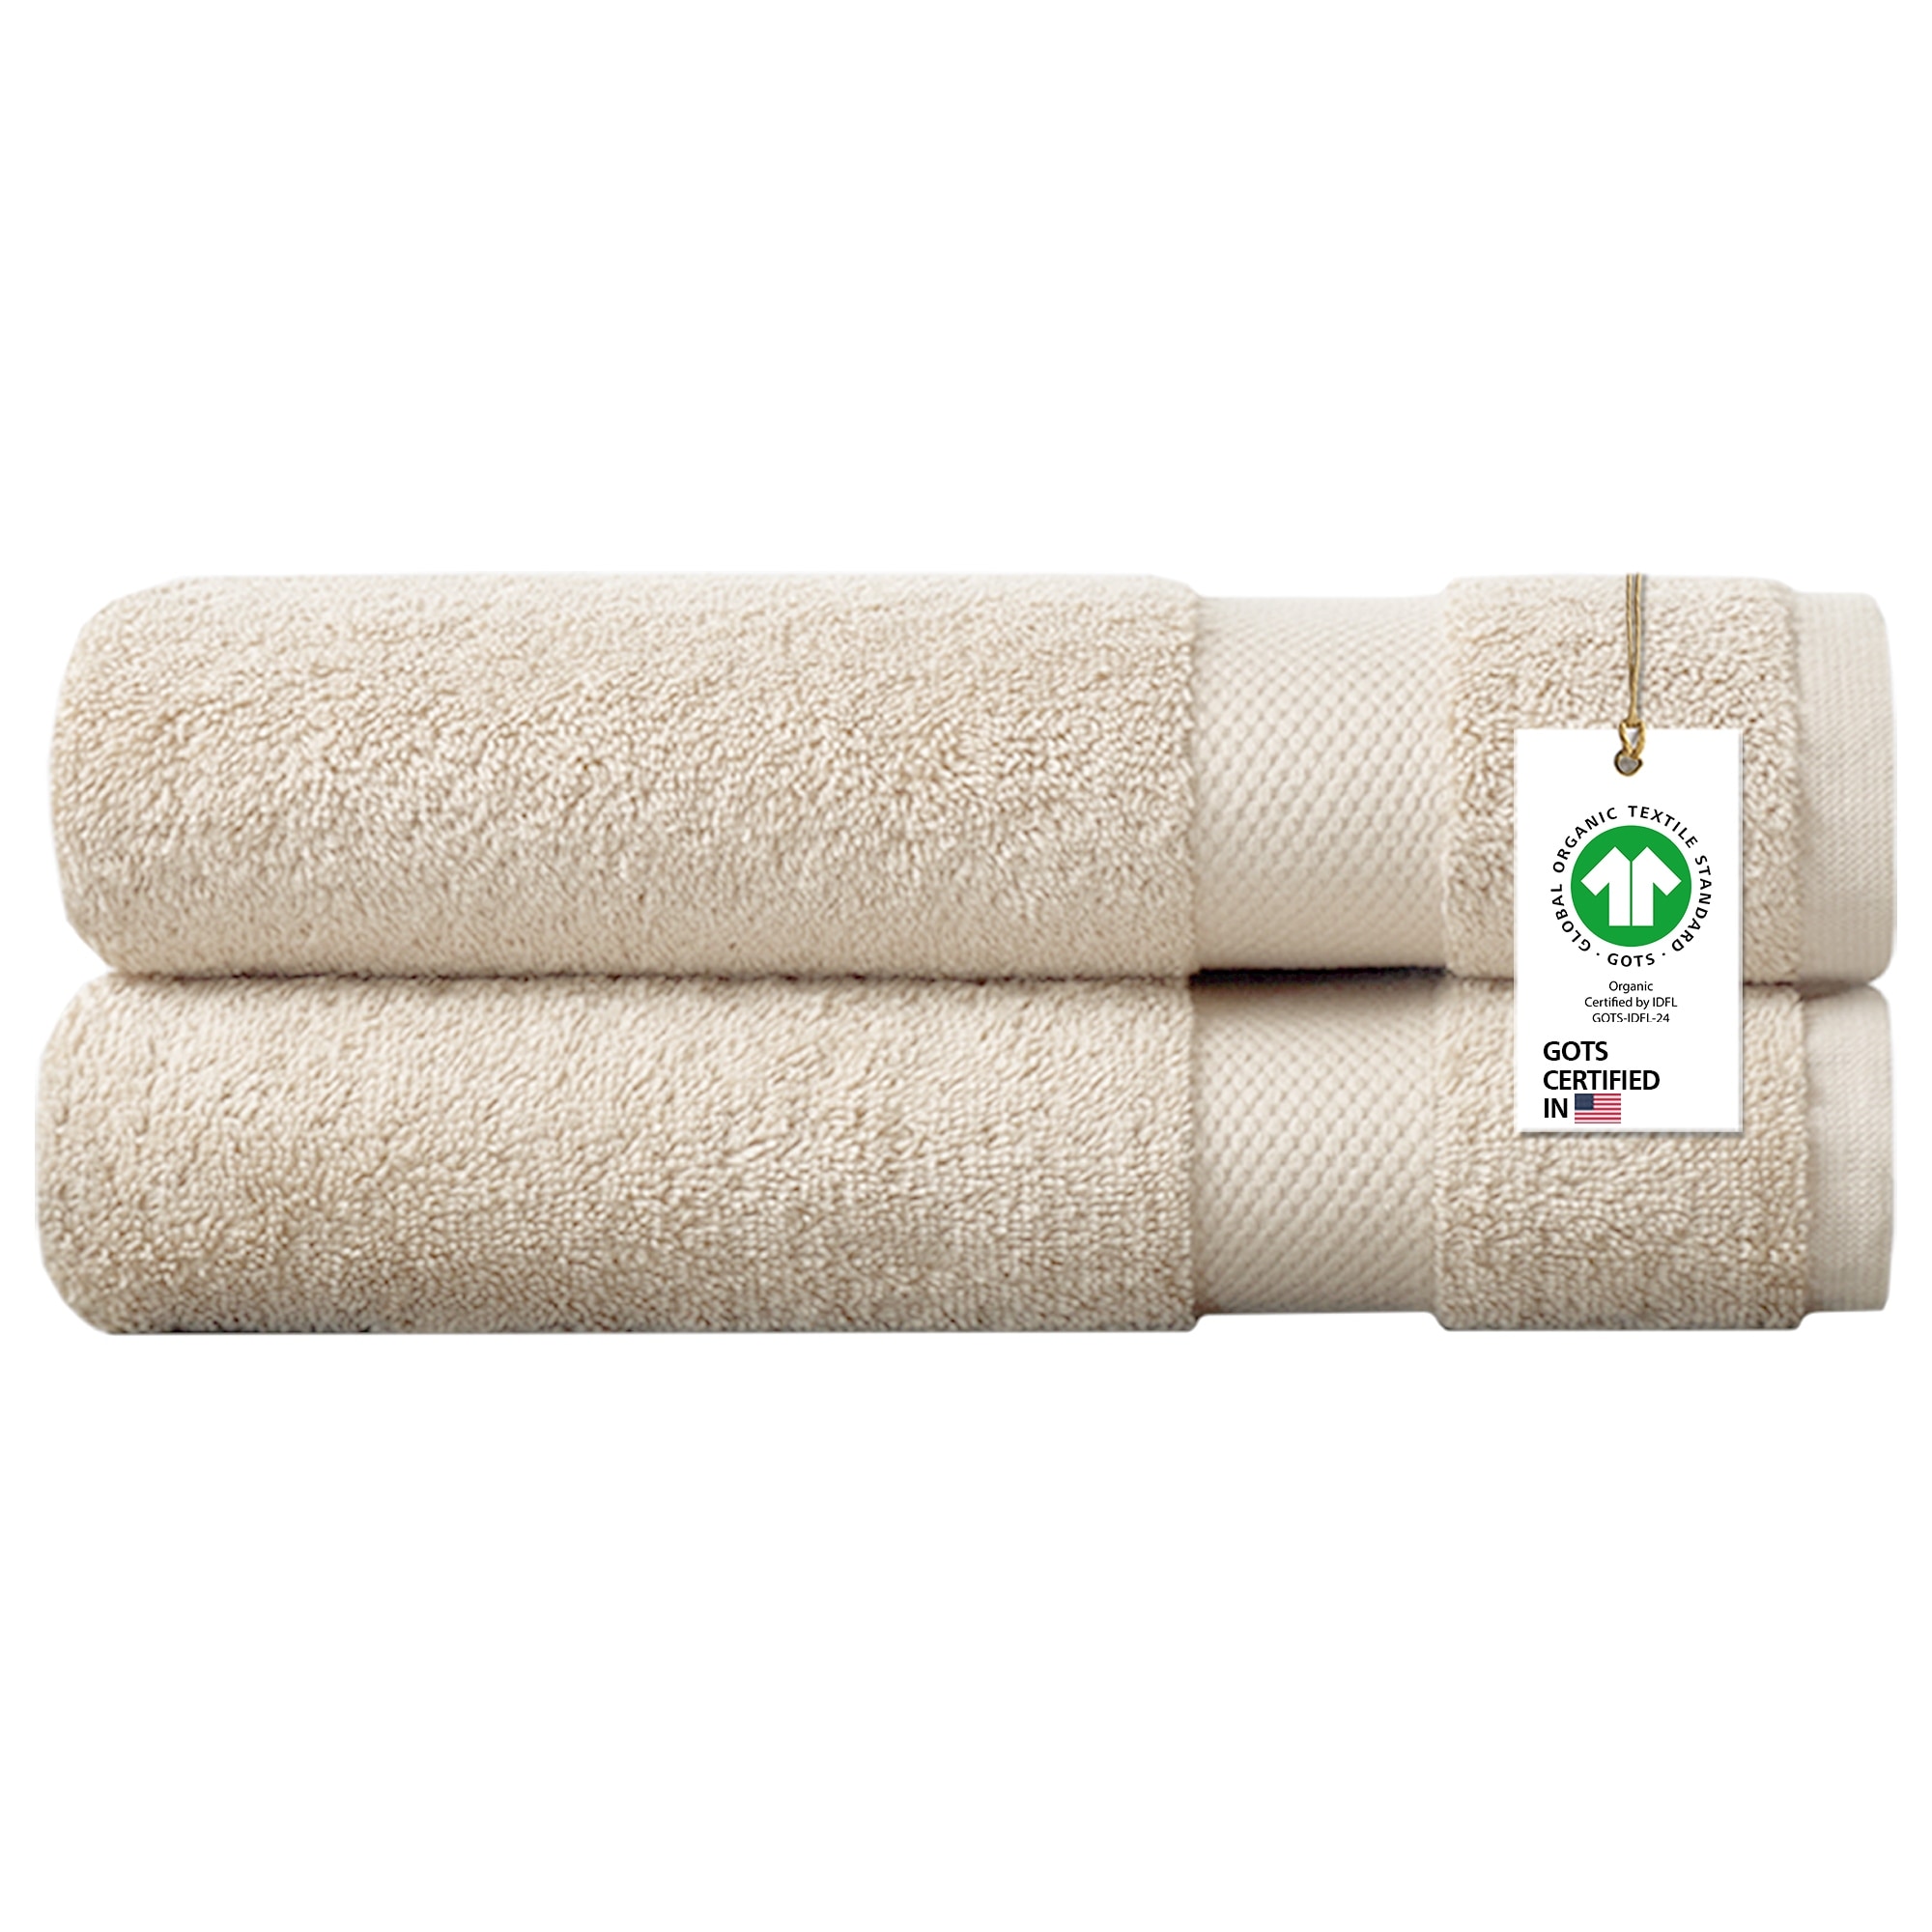 Delara Organic Cotton Feather Touch Quick Dry 700 GSM 6 Pack Bath